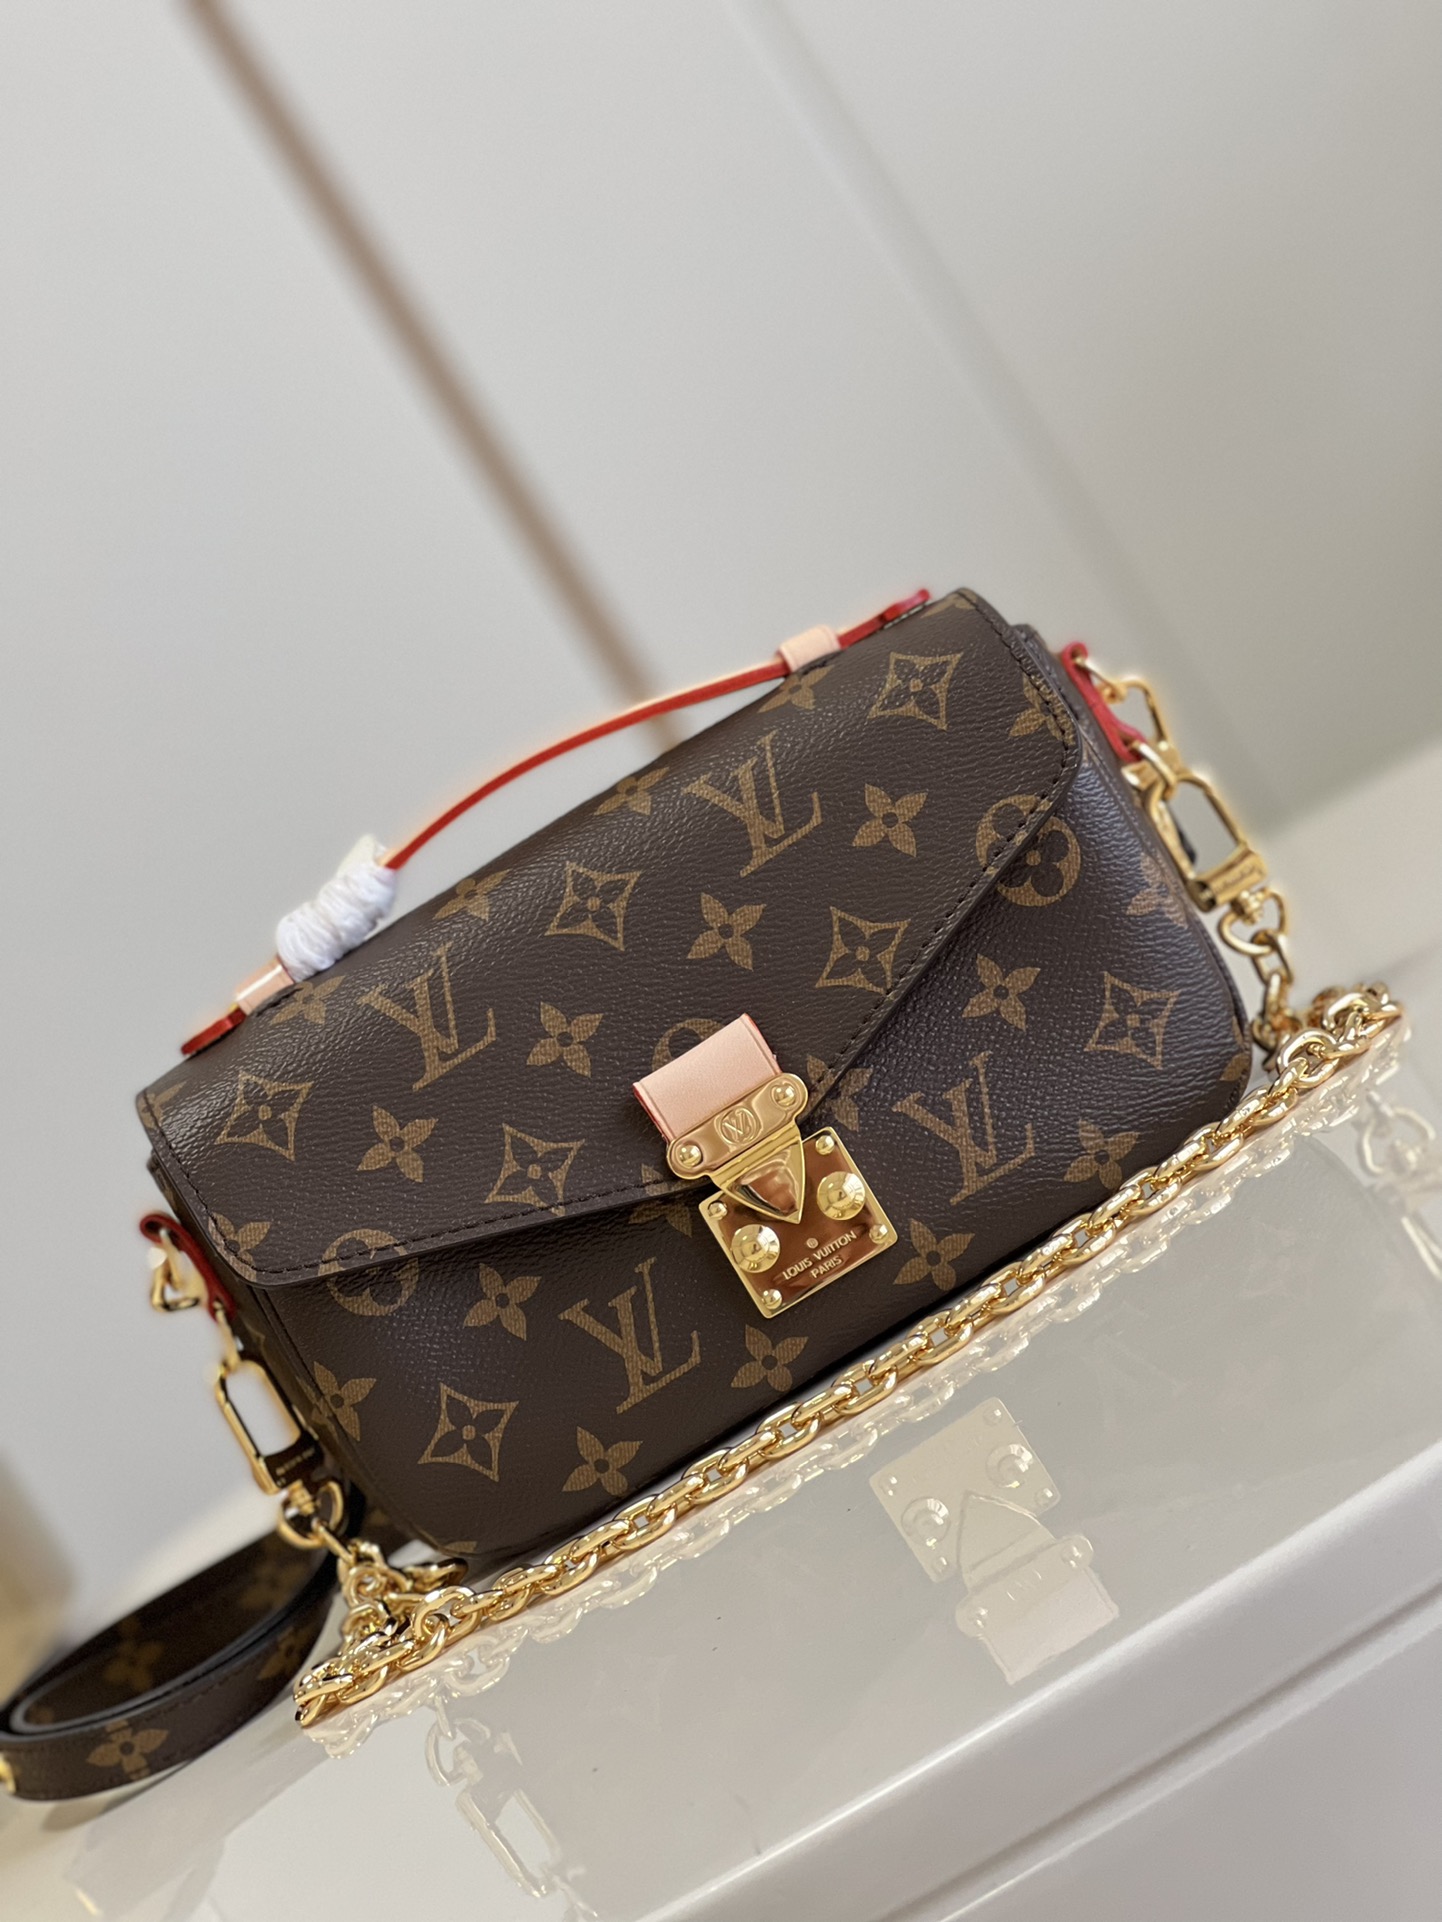 CORRECT VERSION 1:1 Louis Vuitton Pochette Métis East West Bag from Suplook  (TOP QUALITY, 1:1 Reps, Correct material, Pls Contact Whatsapp at  +8618559333945 to make an order or check details. Wholesale and